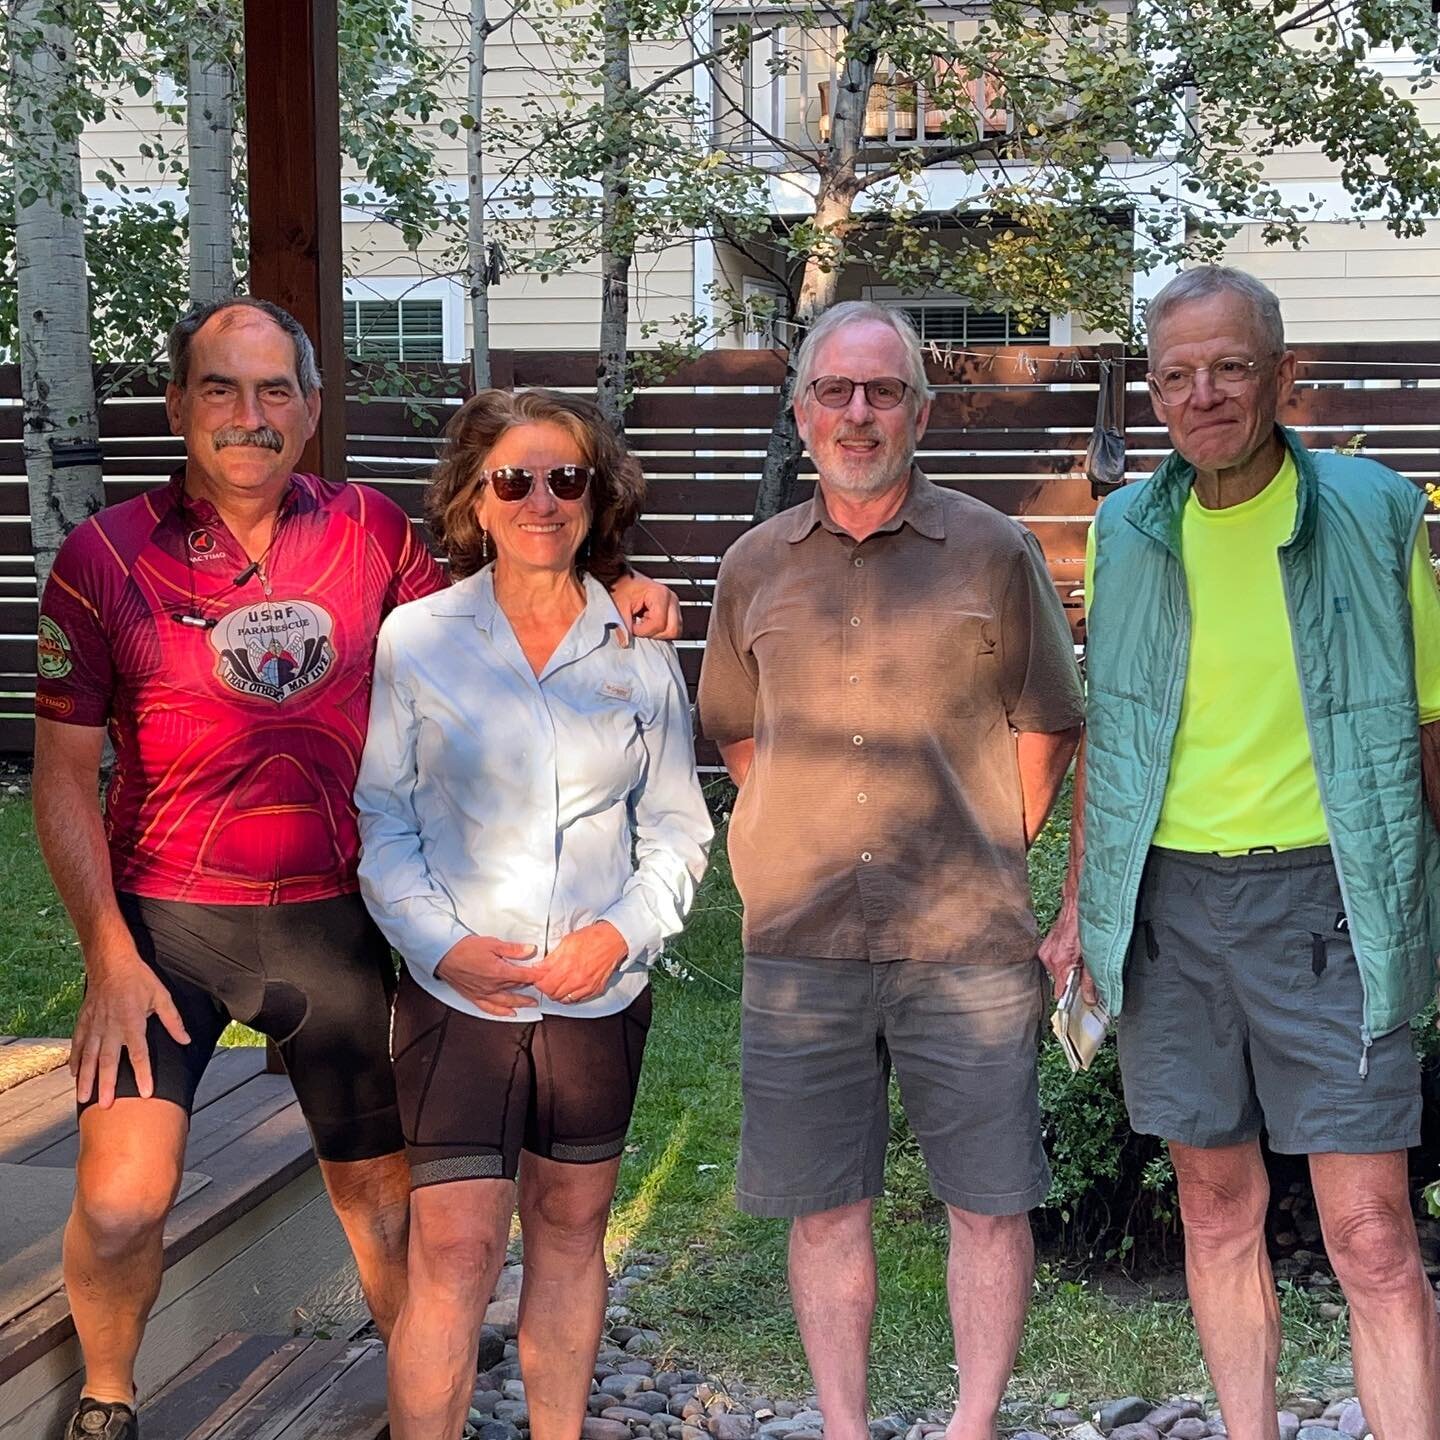 It&rsquo;s a WRAP! Like a lighthouse marking safe harbors, Rachel &amp; Tim beckoned us back to our origin point in Bigfork, MT. The F I N A L day started after a rejuvenating night in Whitefish with WS host Chuck along with fellow guest, Charles (wh